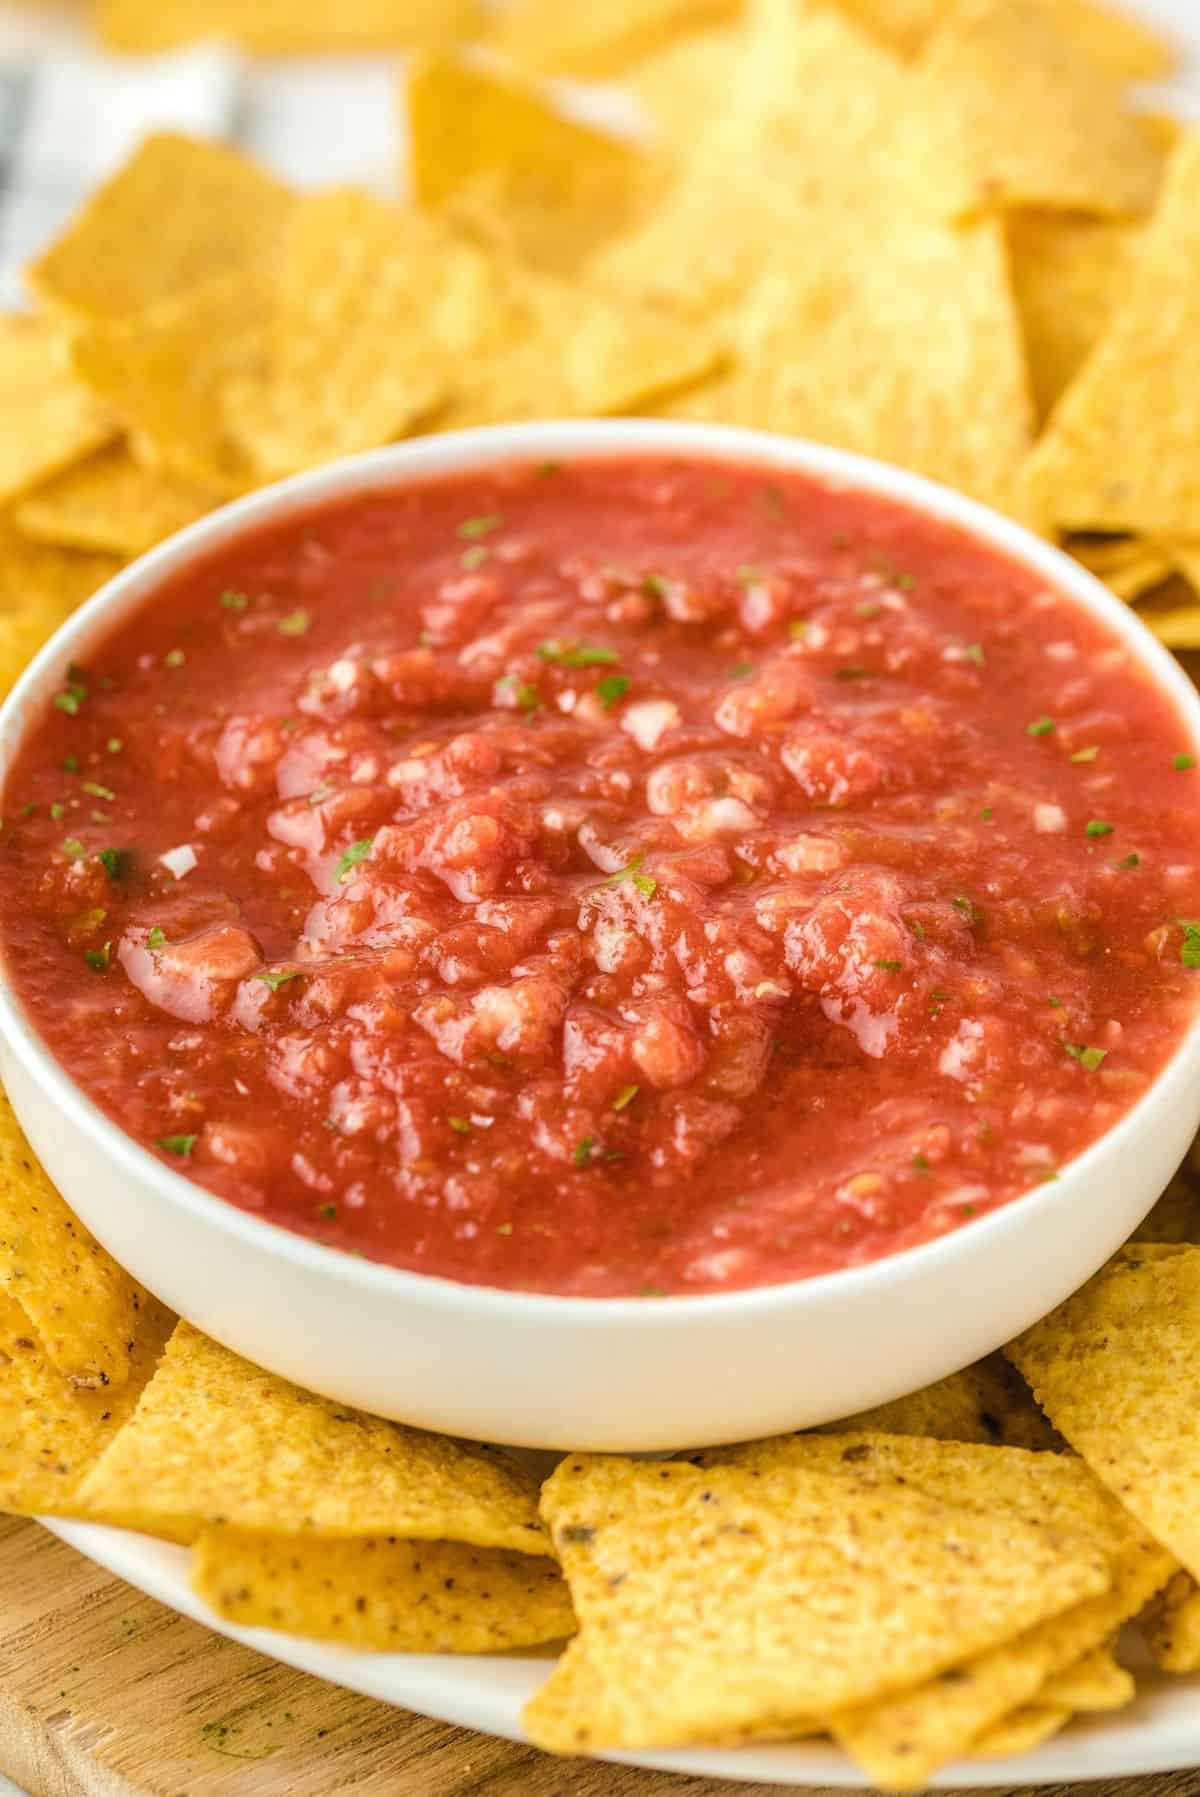 salsa in the bowl placed in the middle of tortilla chips